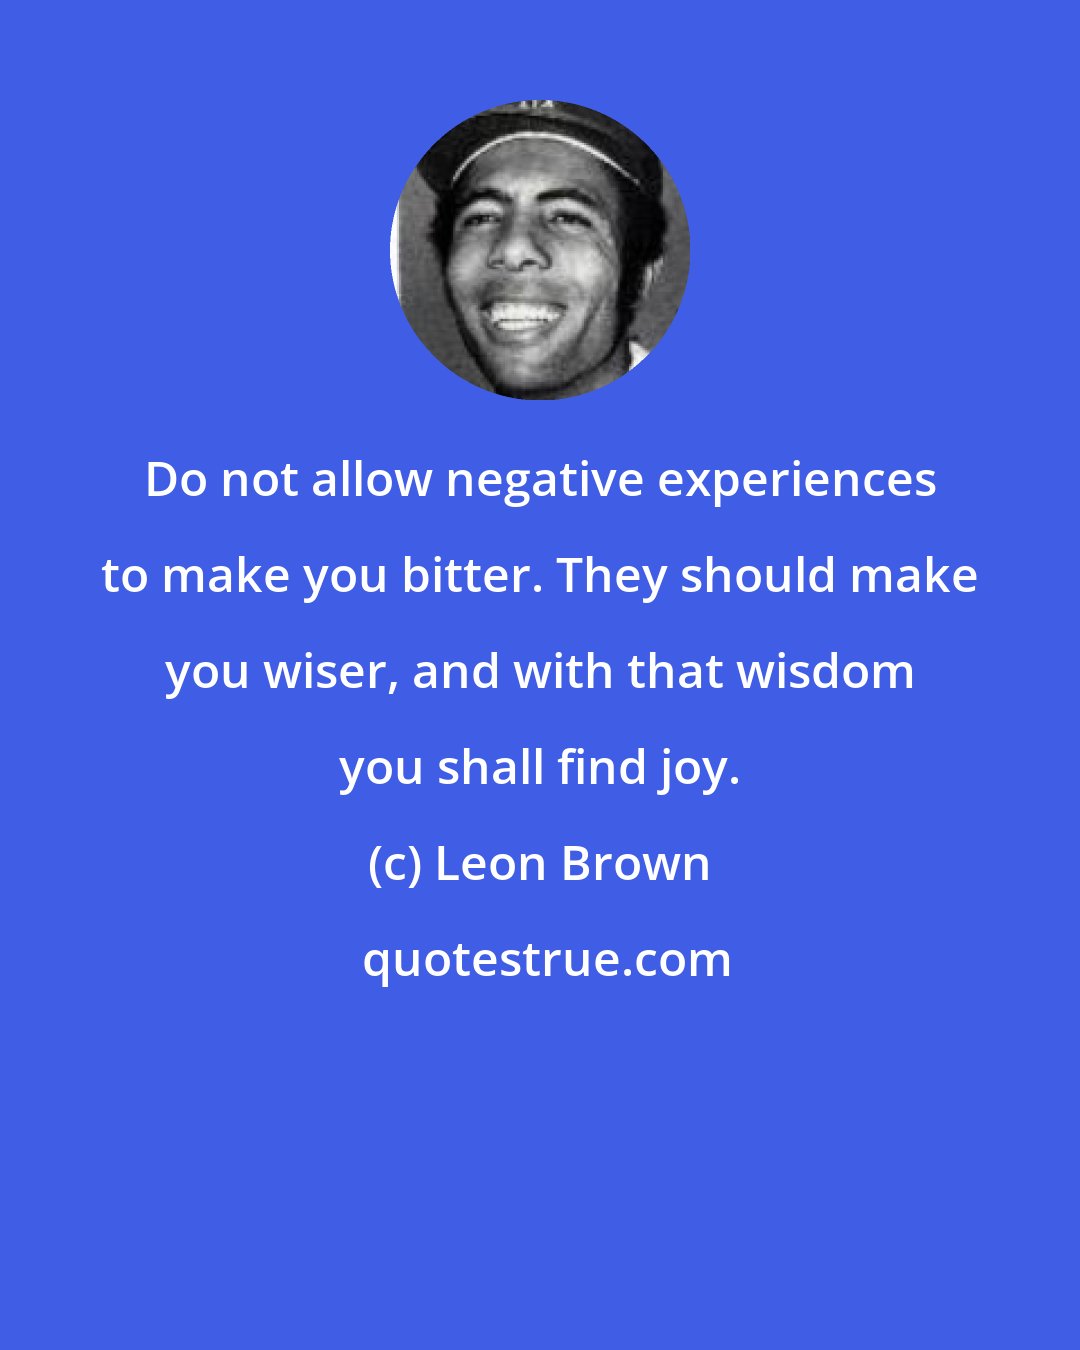 Leon Brown: Do not allow negative experiences to make you bitter. They should make you wiser, and with that wisdom you shall find joy.